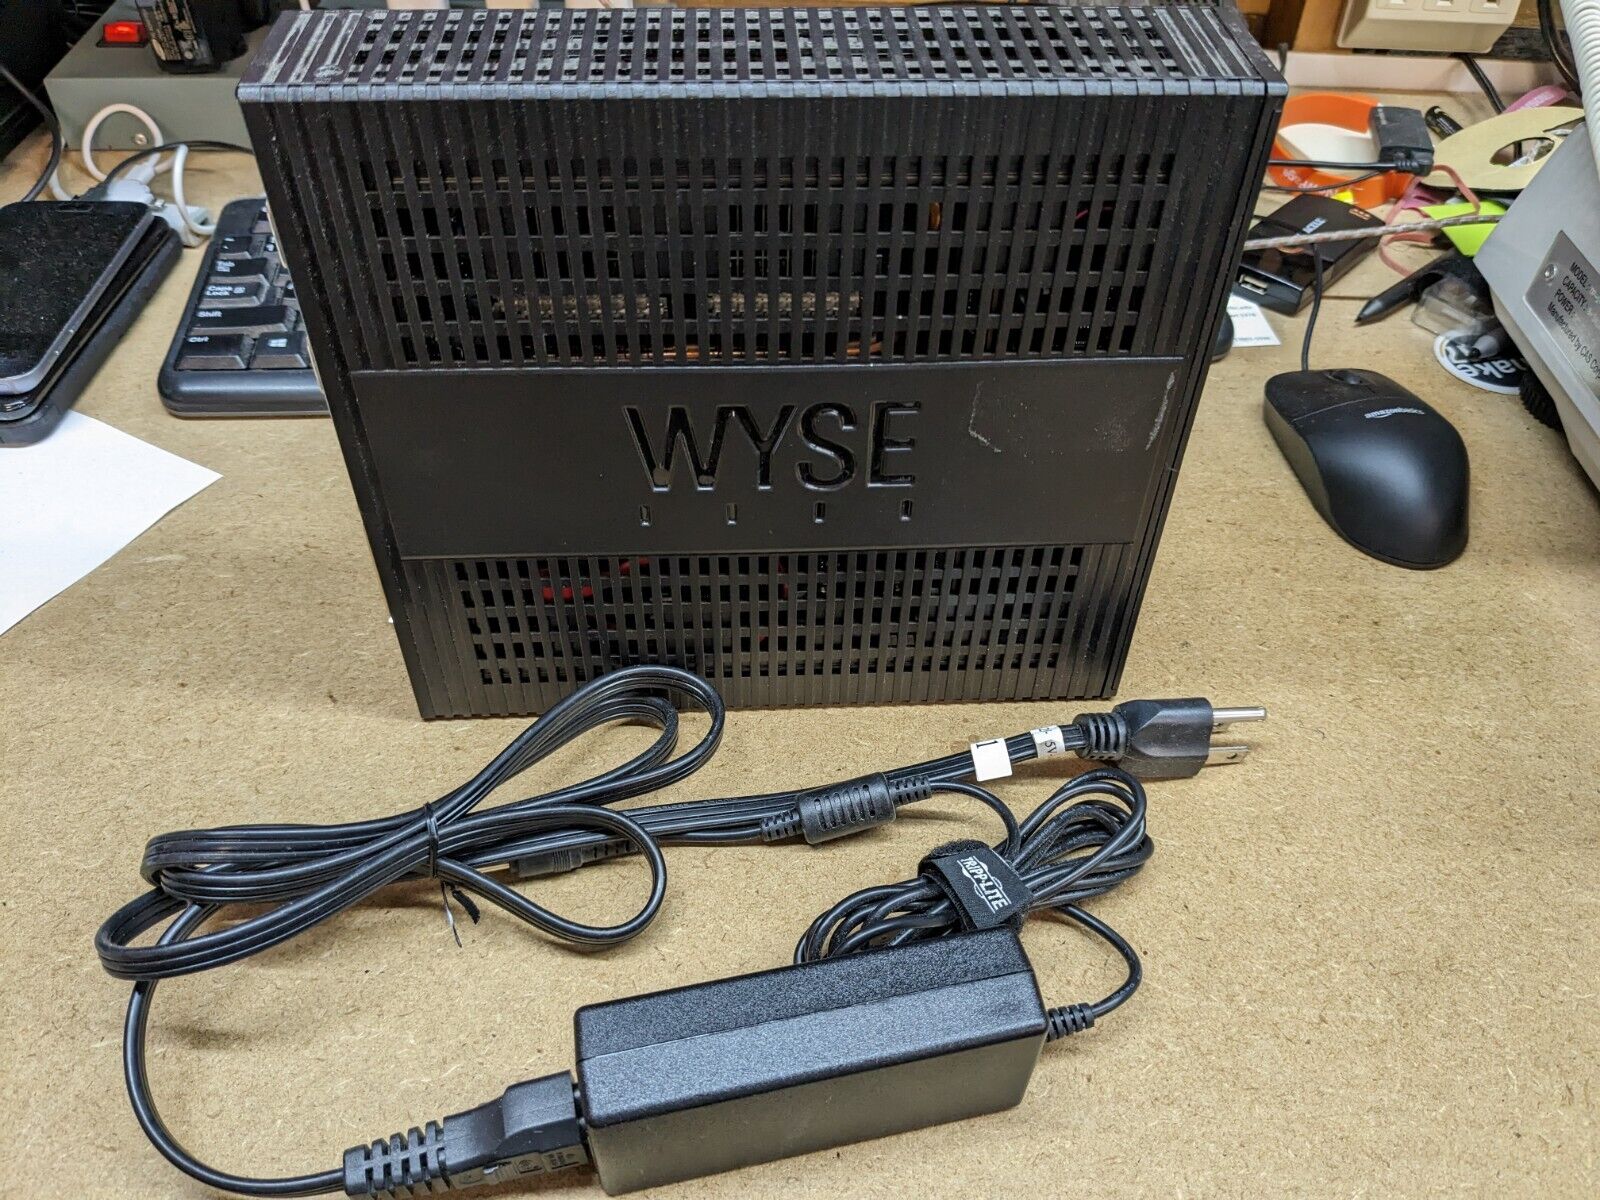 Dell Wyse 7020 Zx0 8GB RAM plus extras on the motherboard serial ioioi ps2 +more